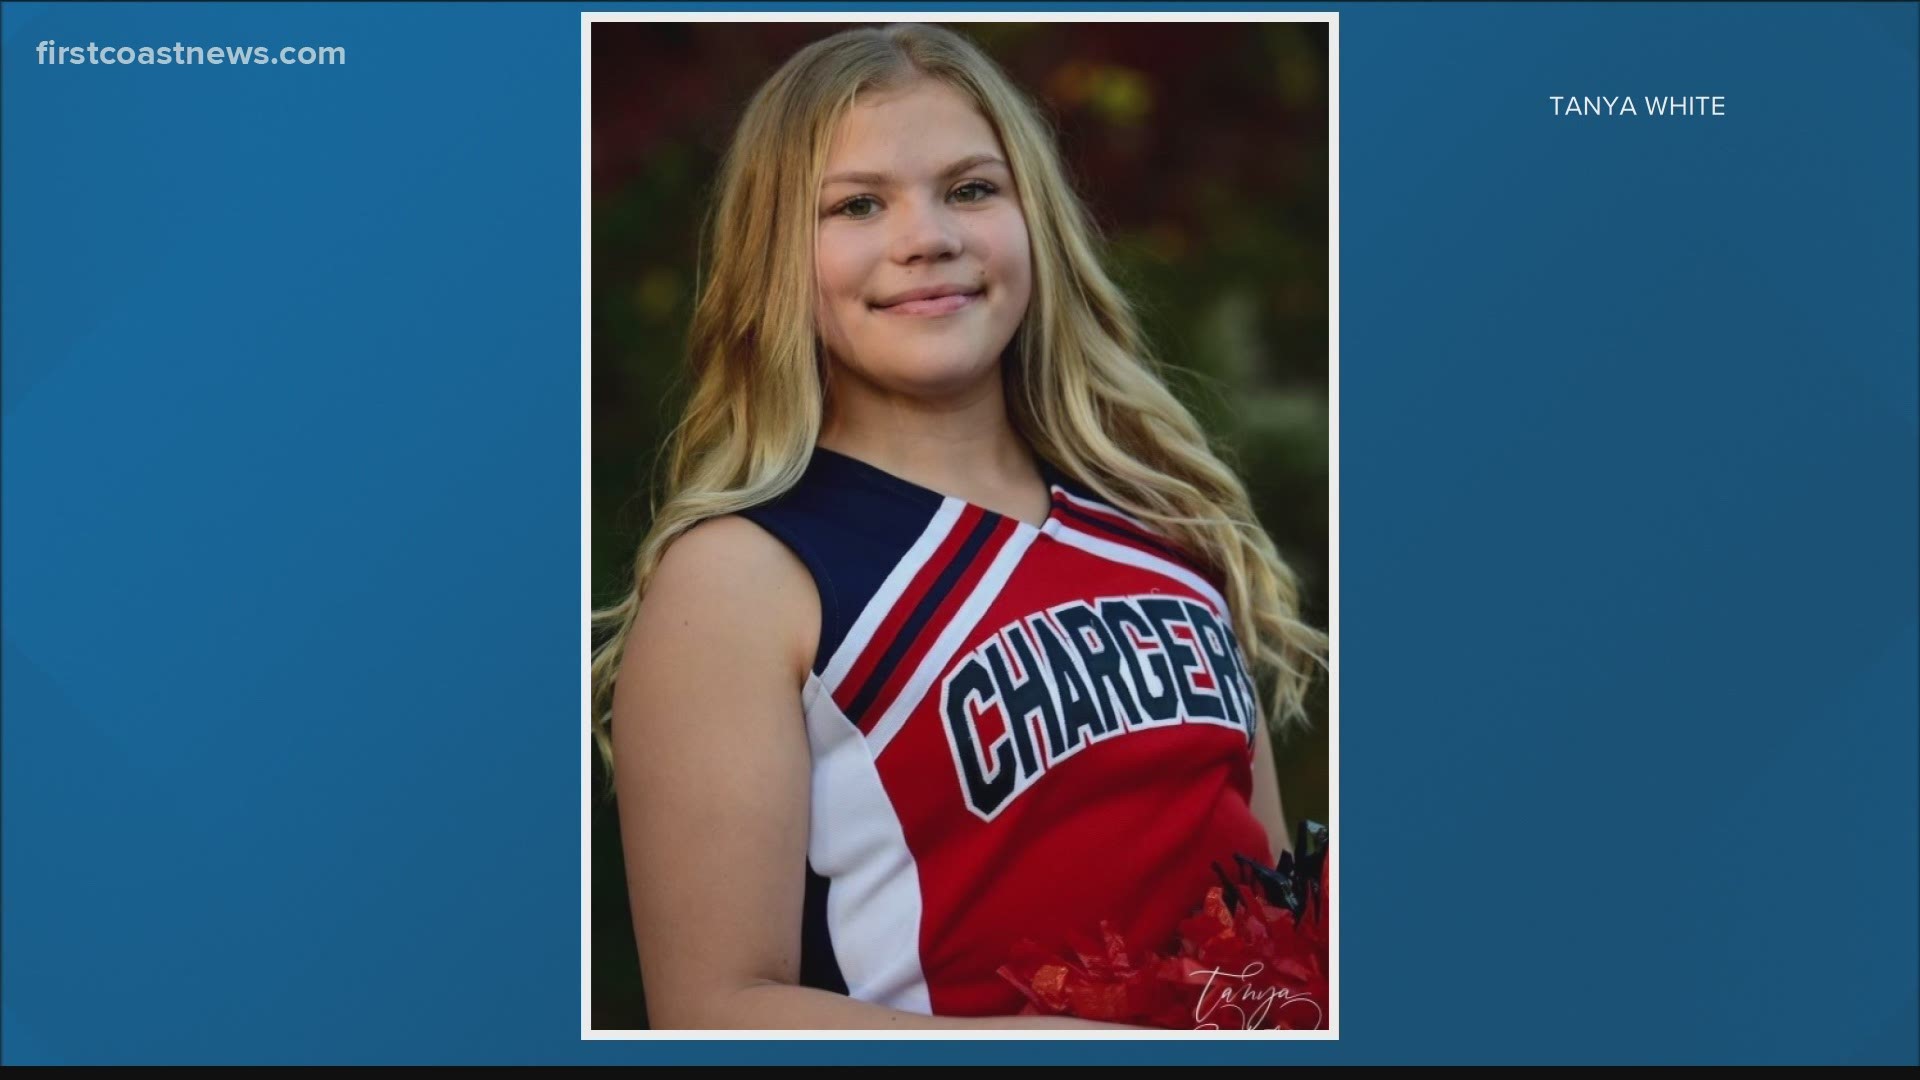 Tristyn Bailey was last seen in the pre-dawn hours of Sunday. She was later found dead, and a 14-year-old boy is charged with her death.